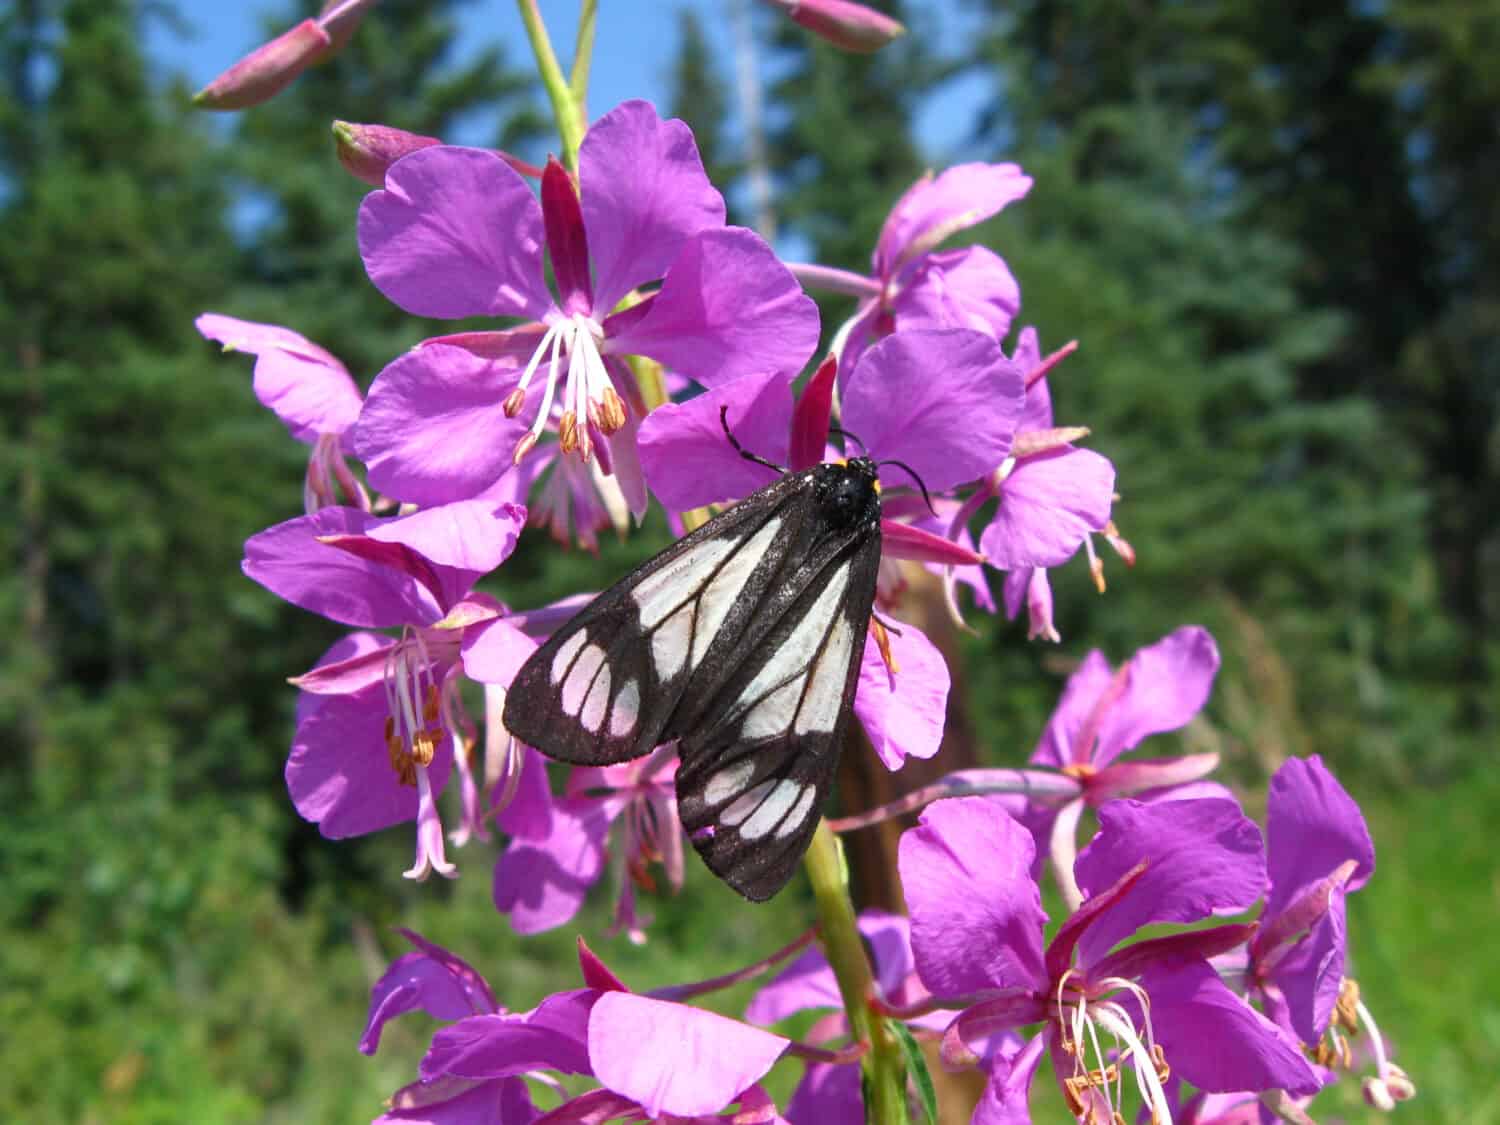 Police Car moth on fireweed blooms.